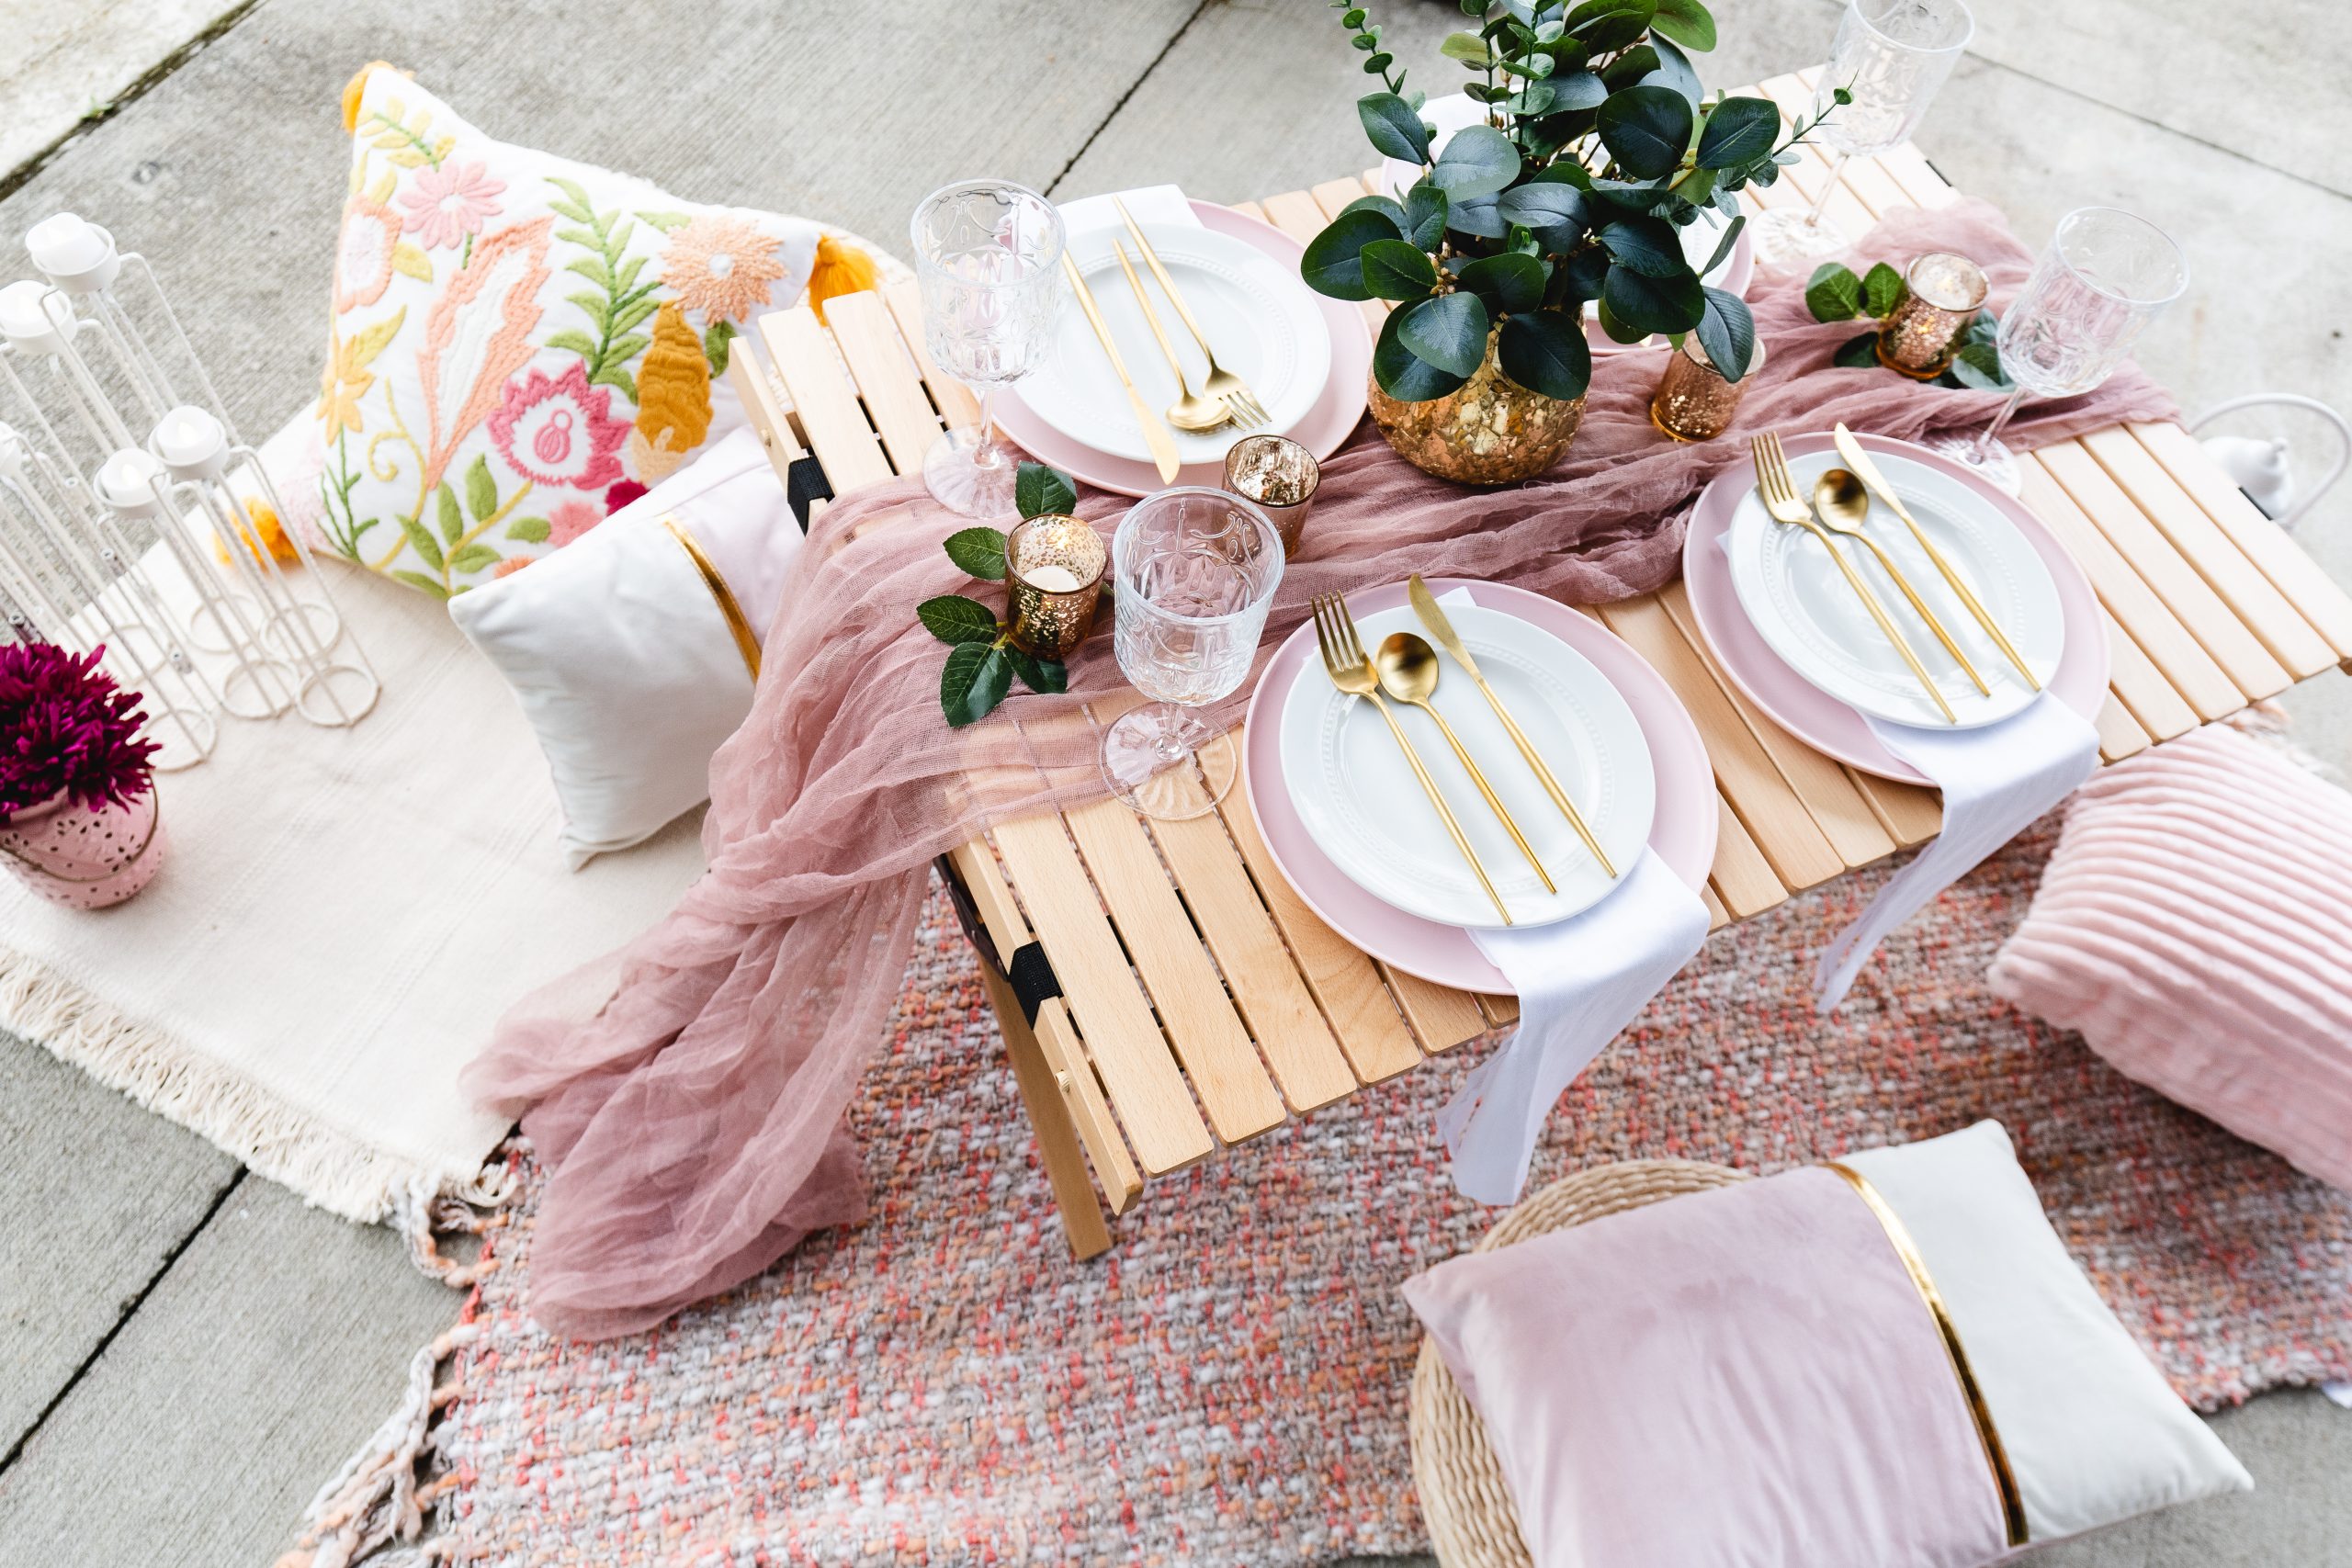 Luxurious Picnic Ideas For The Weekend